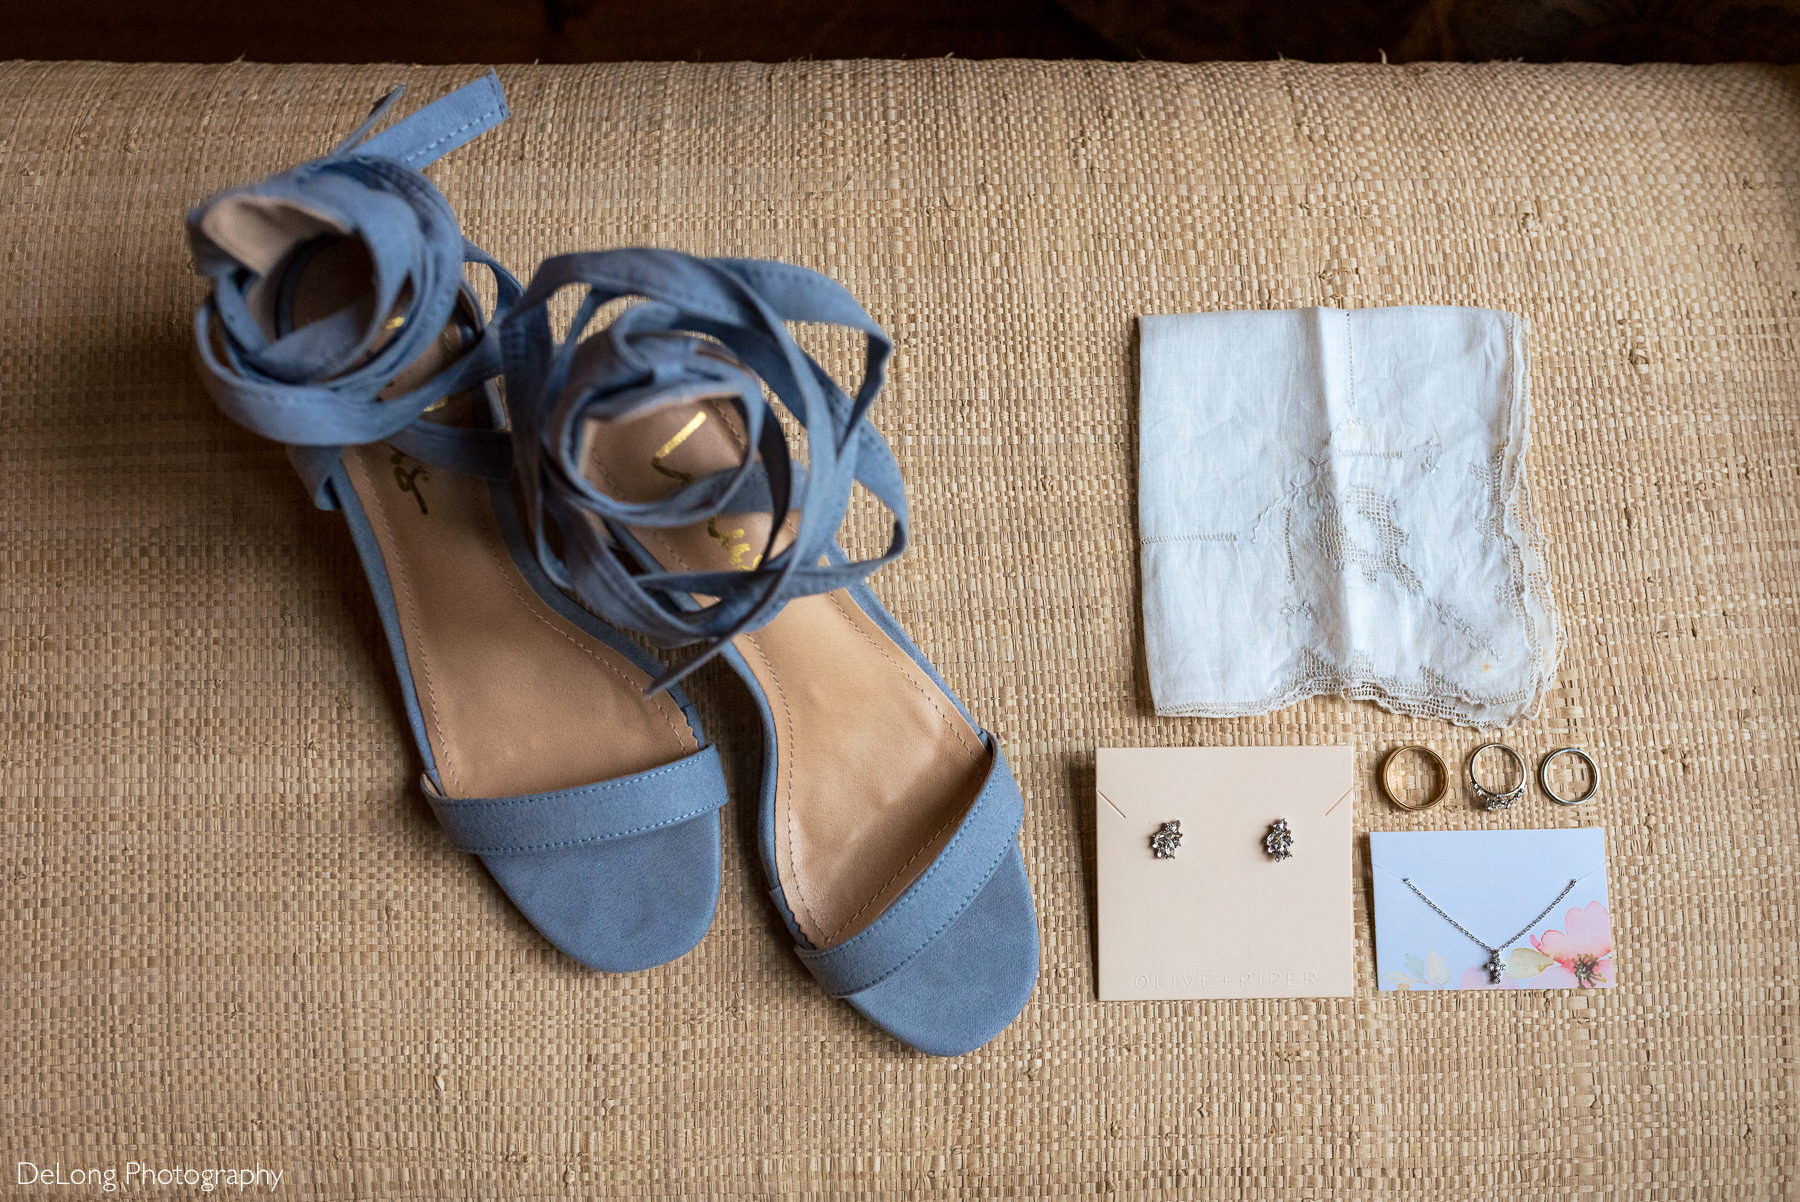 Bride's blue suede shoes, handkerchief and jewelry details by Charlotte wedding photographers DeLong Photography